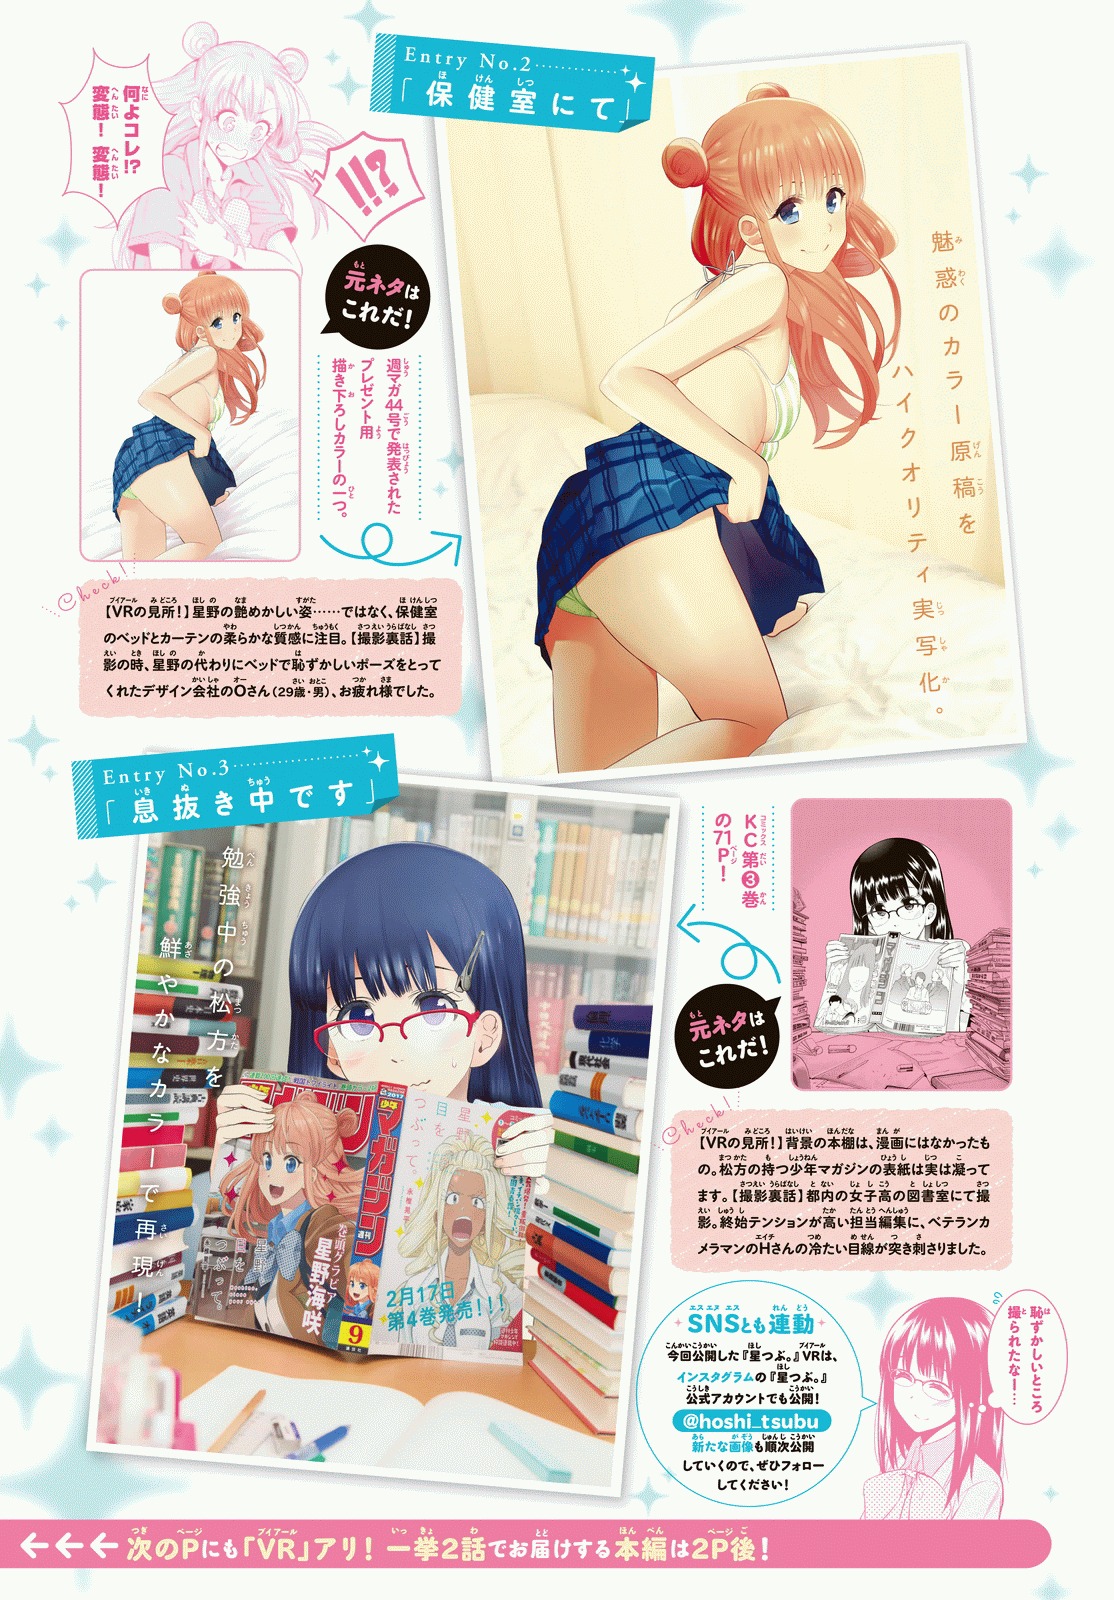 Hoshino, Me O Tsubutte Vol. 5 Ch. 39 Head to the Dance Hall in District 3104